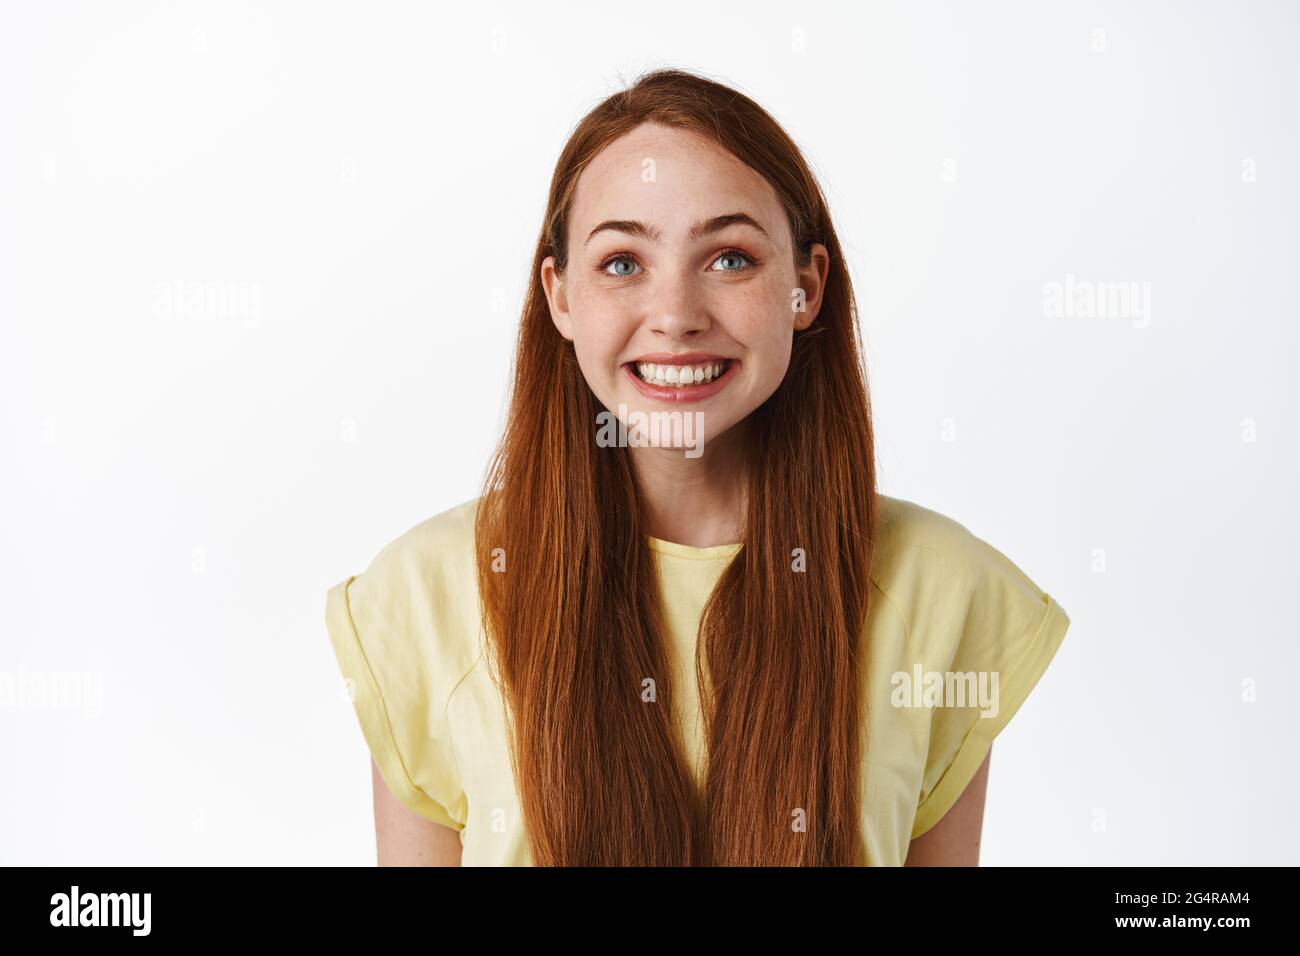 Close up of hopeful pretty girl with long red hair and freckles, looking below camera at tv screen, smiling happy and pleased with results, standing Stock Photo